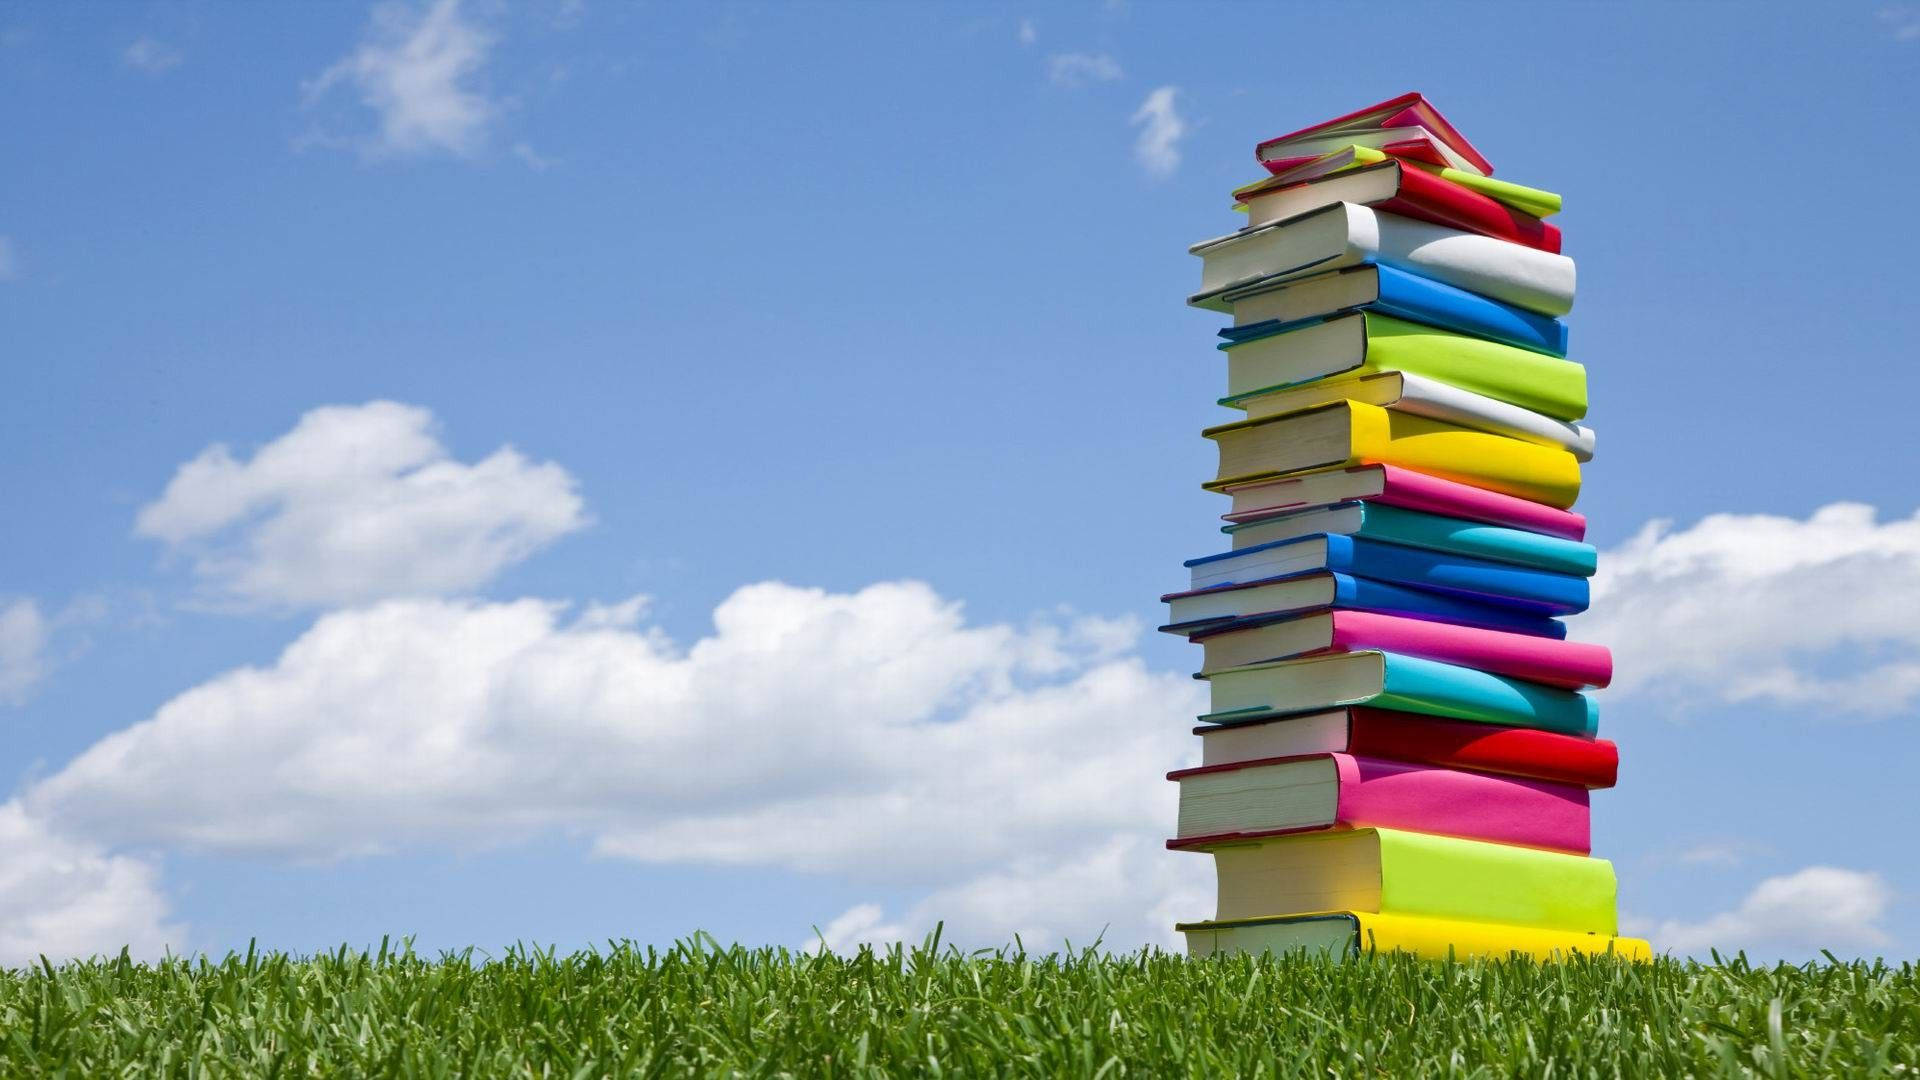 Colorful Book Stack Outside Wallpaper